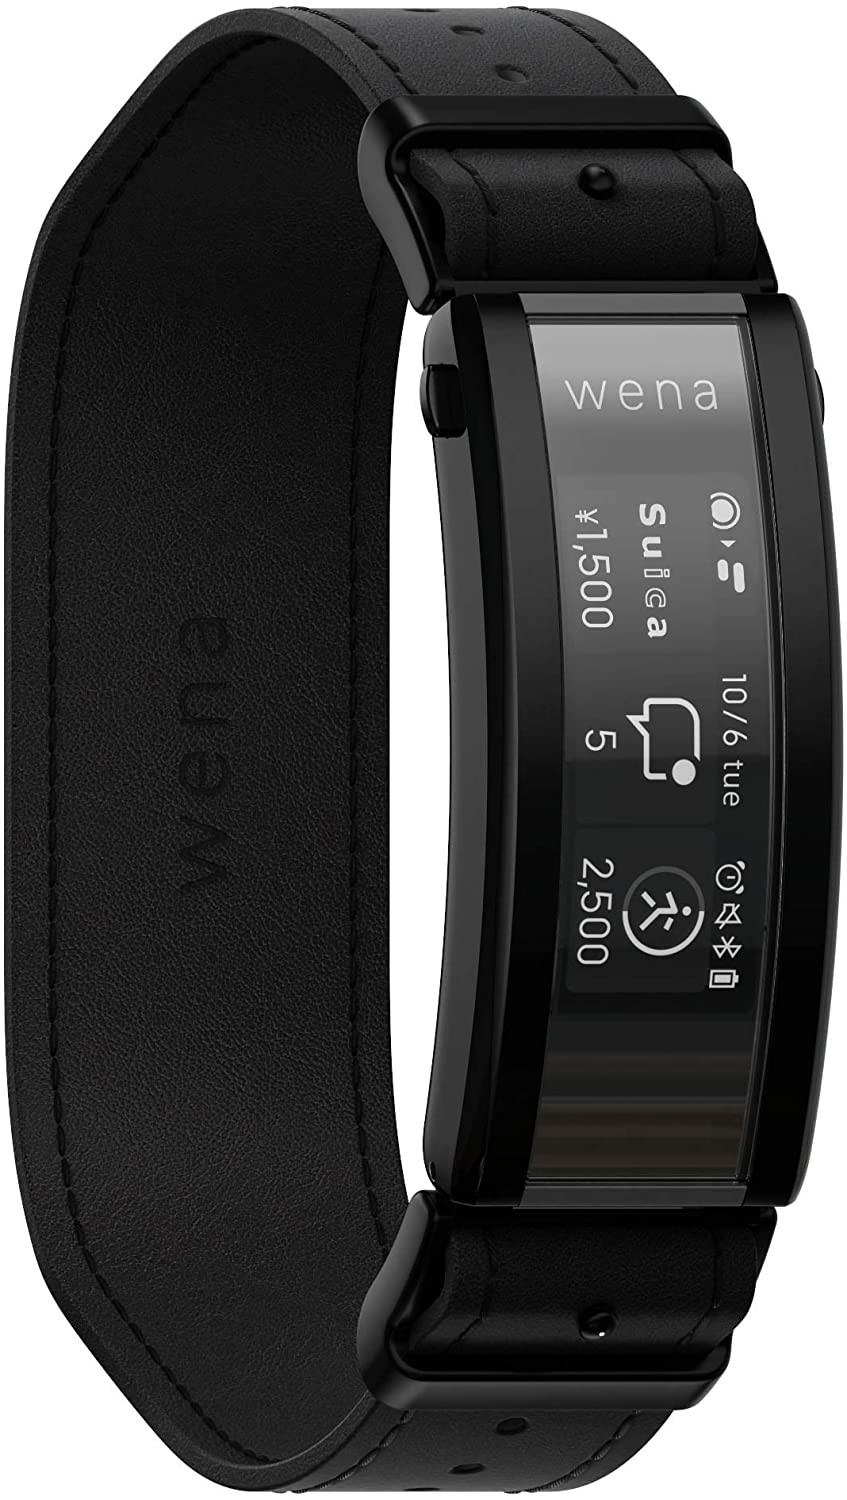 Sony Wena 3 smart watch band launched Wear a normal watch to use smart band  functions, support Alexa.